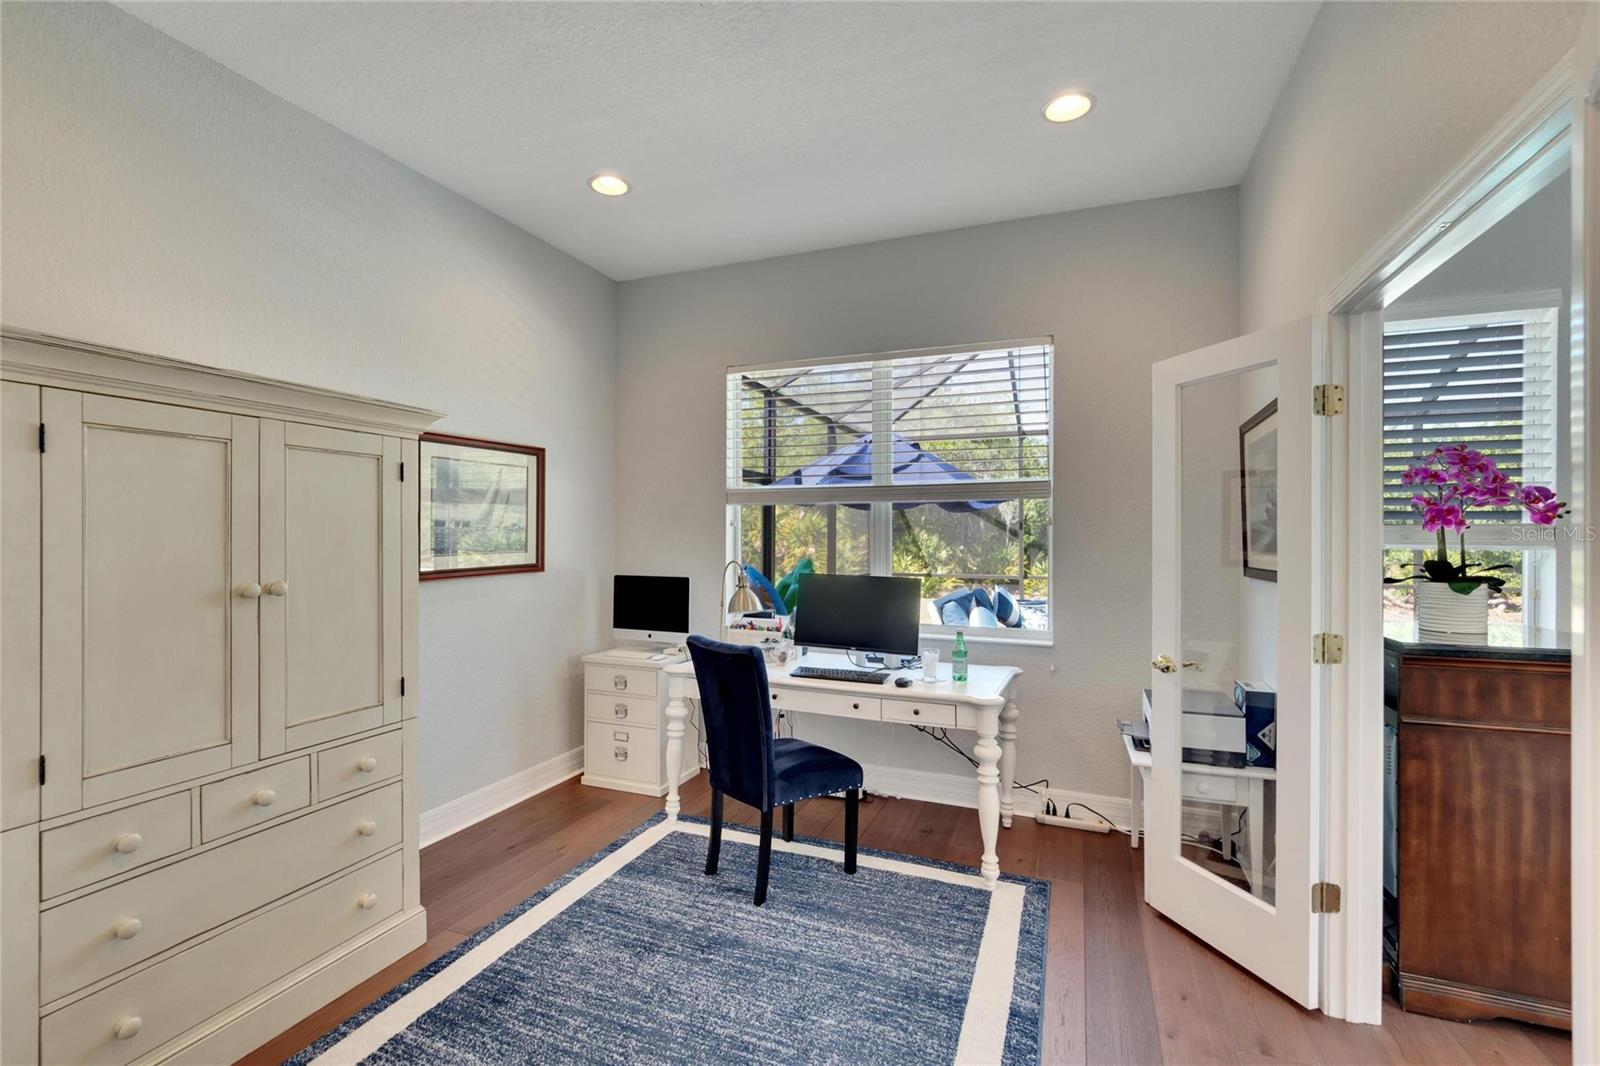 Third Bedroom or office? Featuring French doors that flow into Great Room.